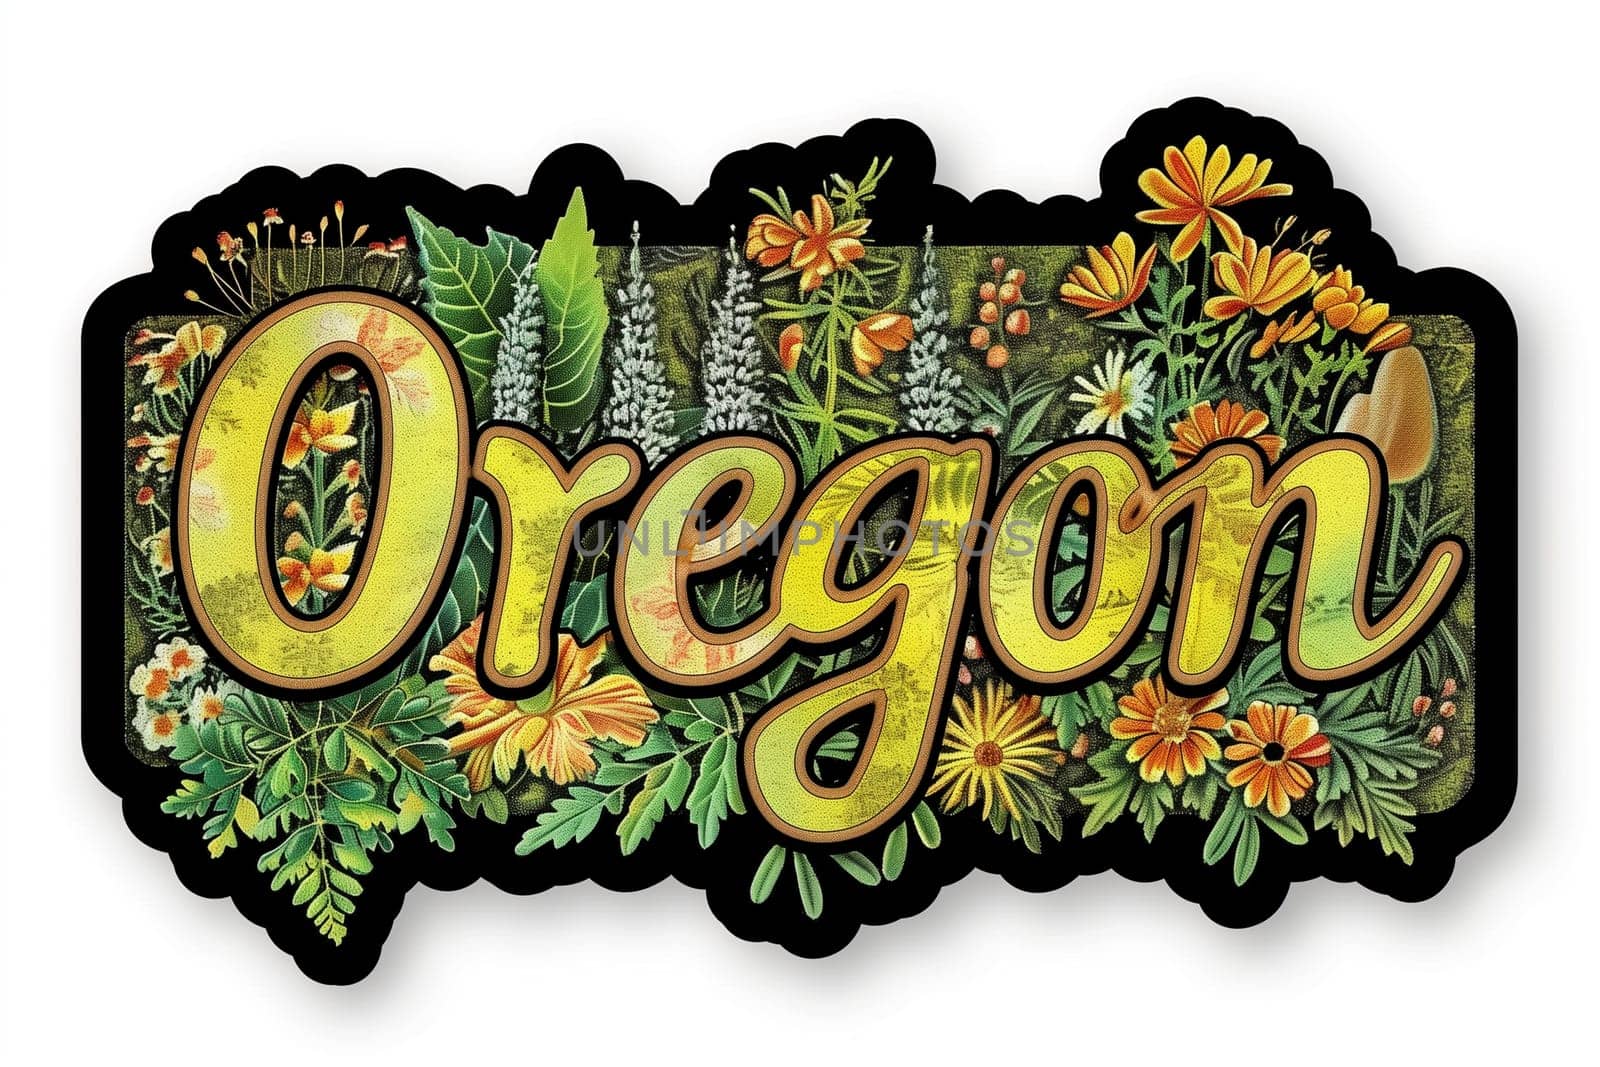 An Oregon sign covered in various flowers and plants, adding a touch of nature to the roadside landmark.